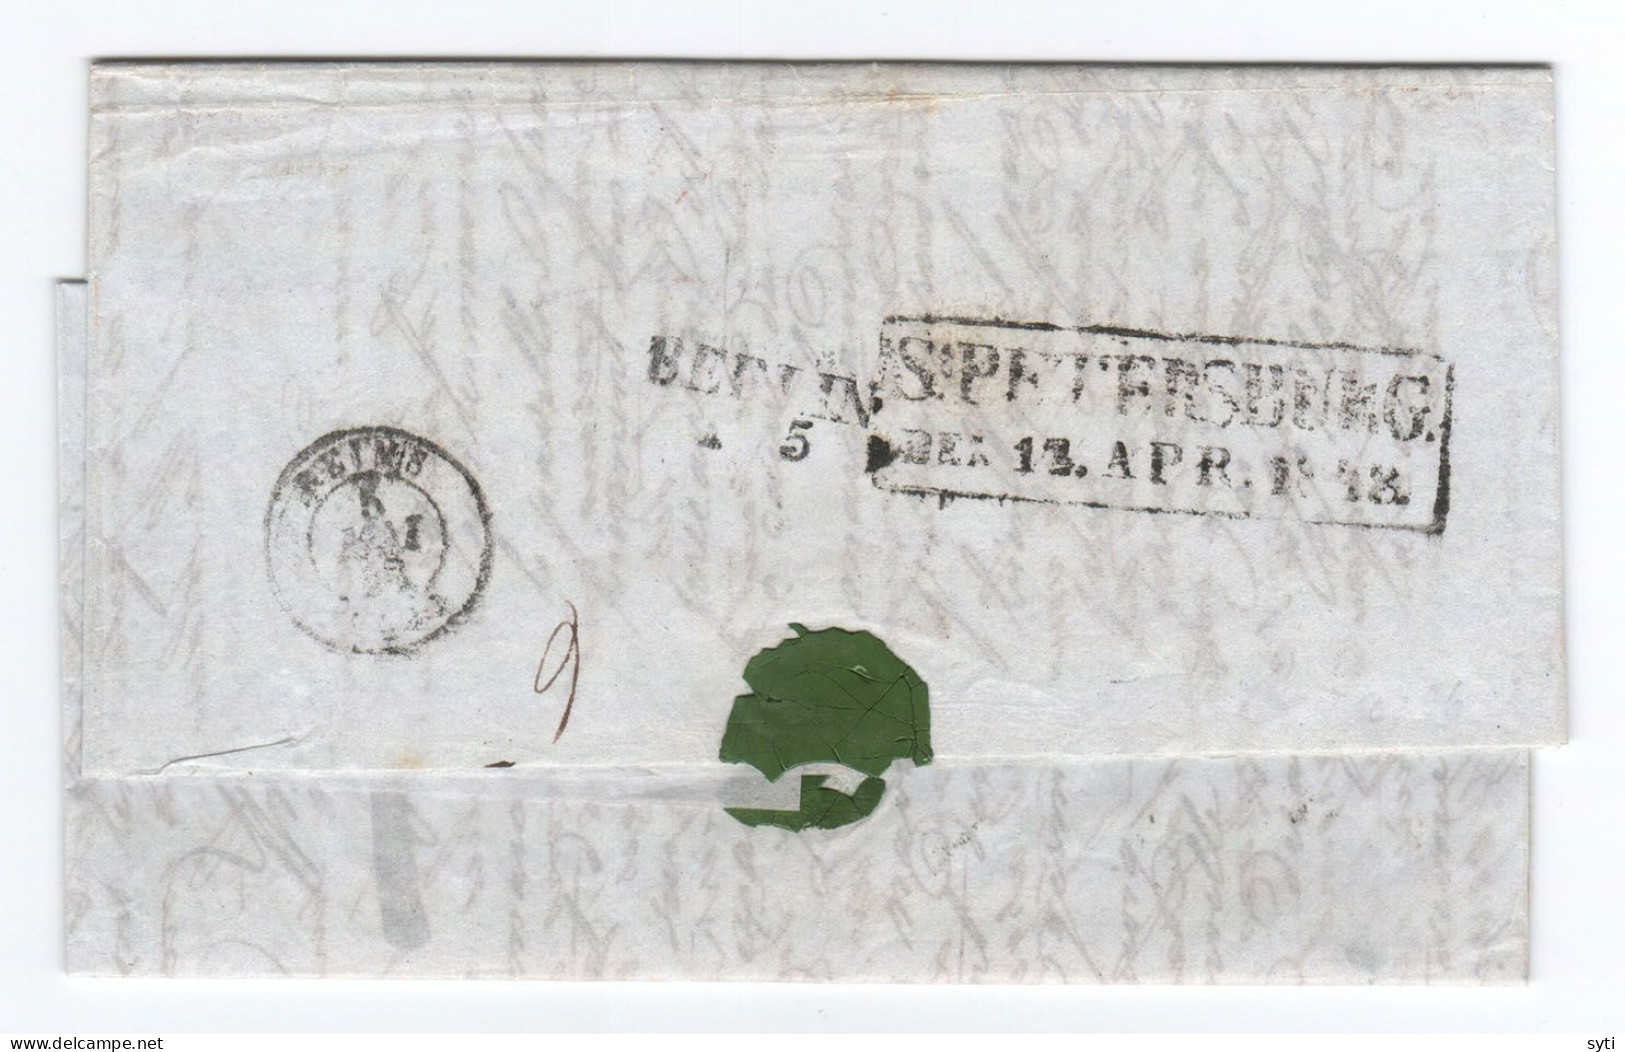 Russia 1848 Cover St. Petersburg To France Via BERLIN 1 5 AUS RUSSLAND FRANCO And “P.D.” In Black - Covers & Documents